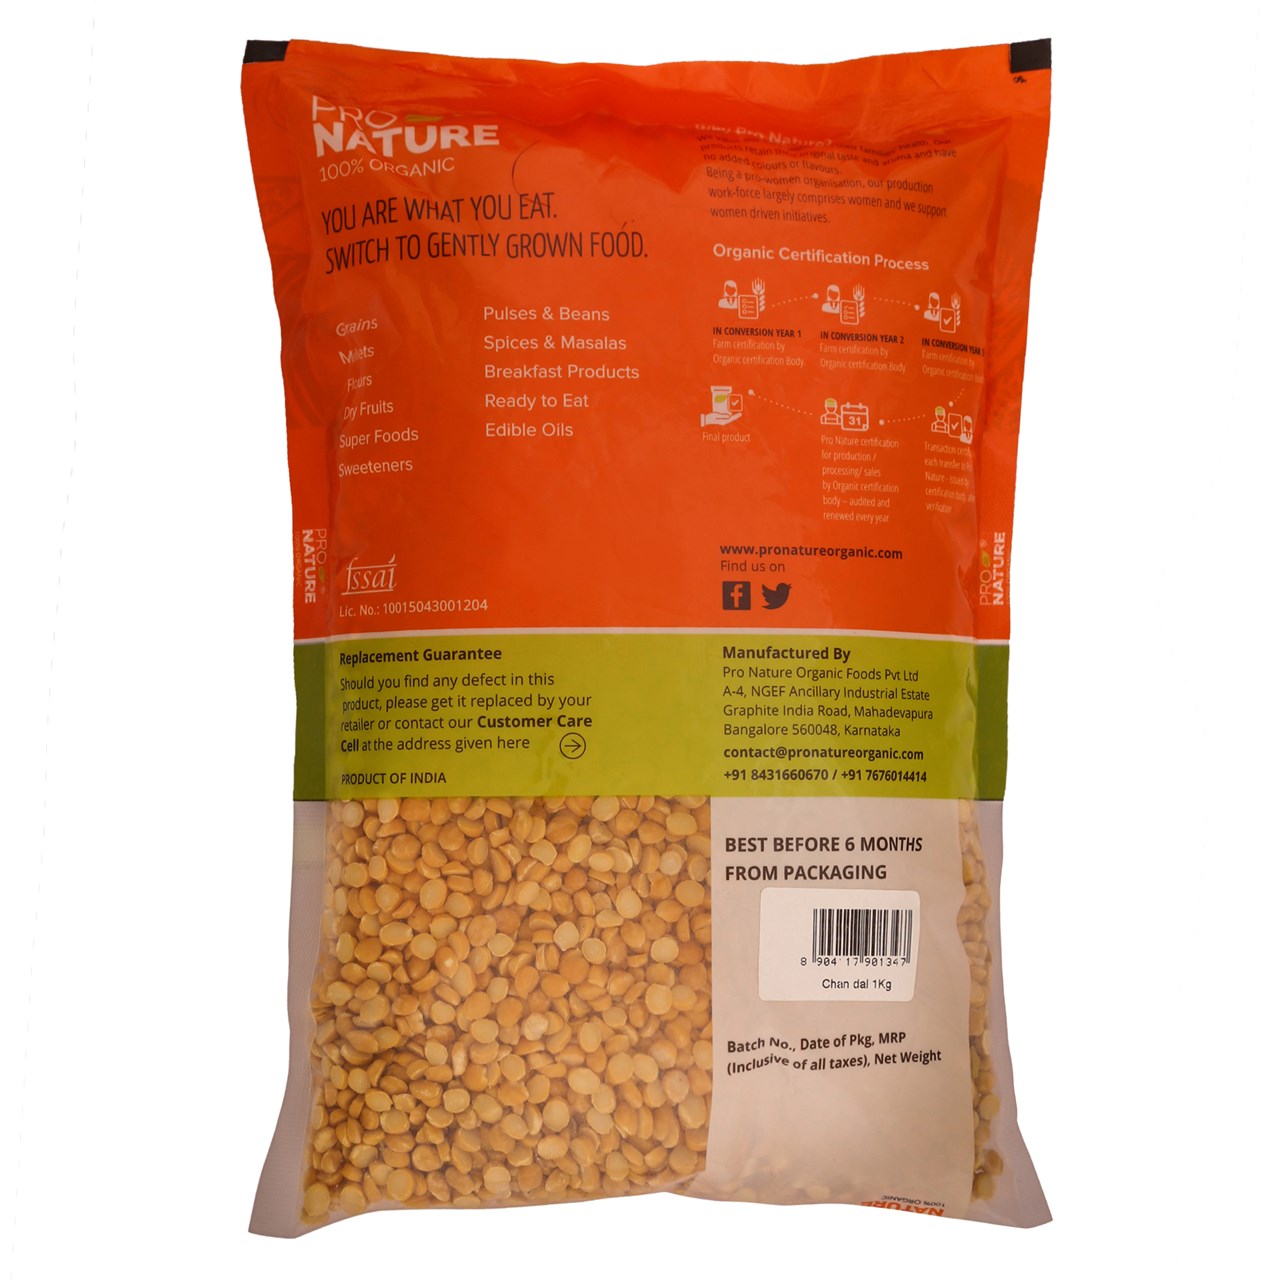 Picture of  Pro Nature 100% Organic Channa Dal 1 kg